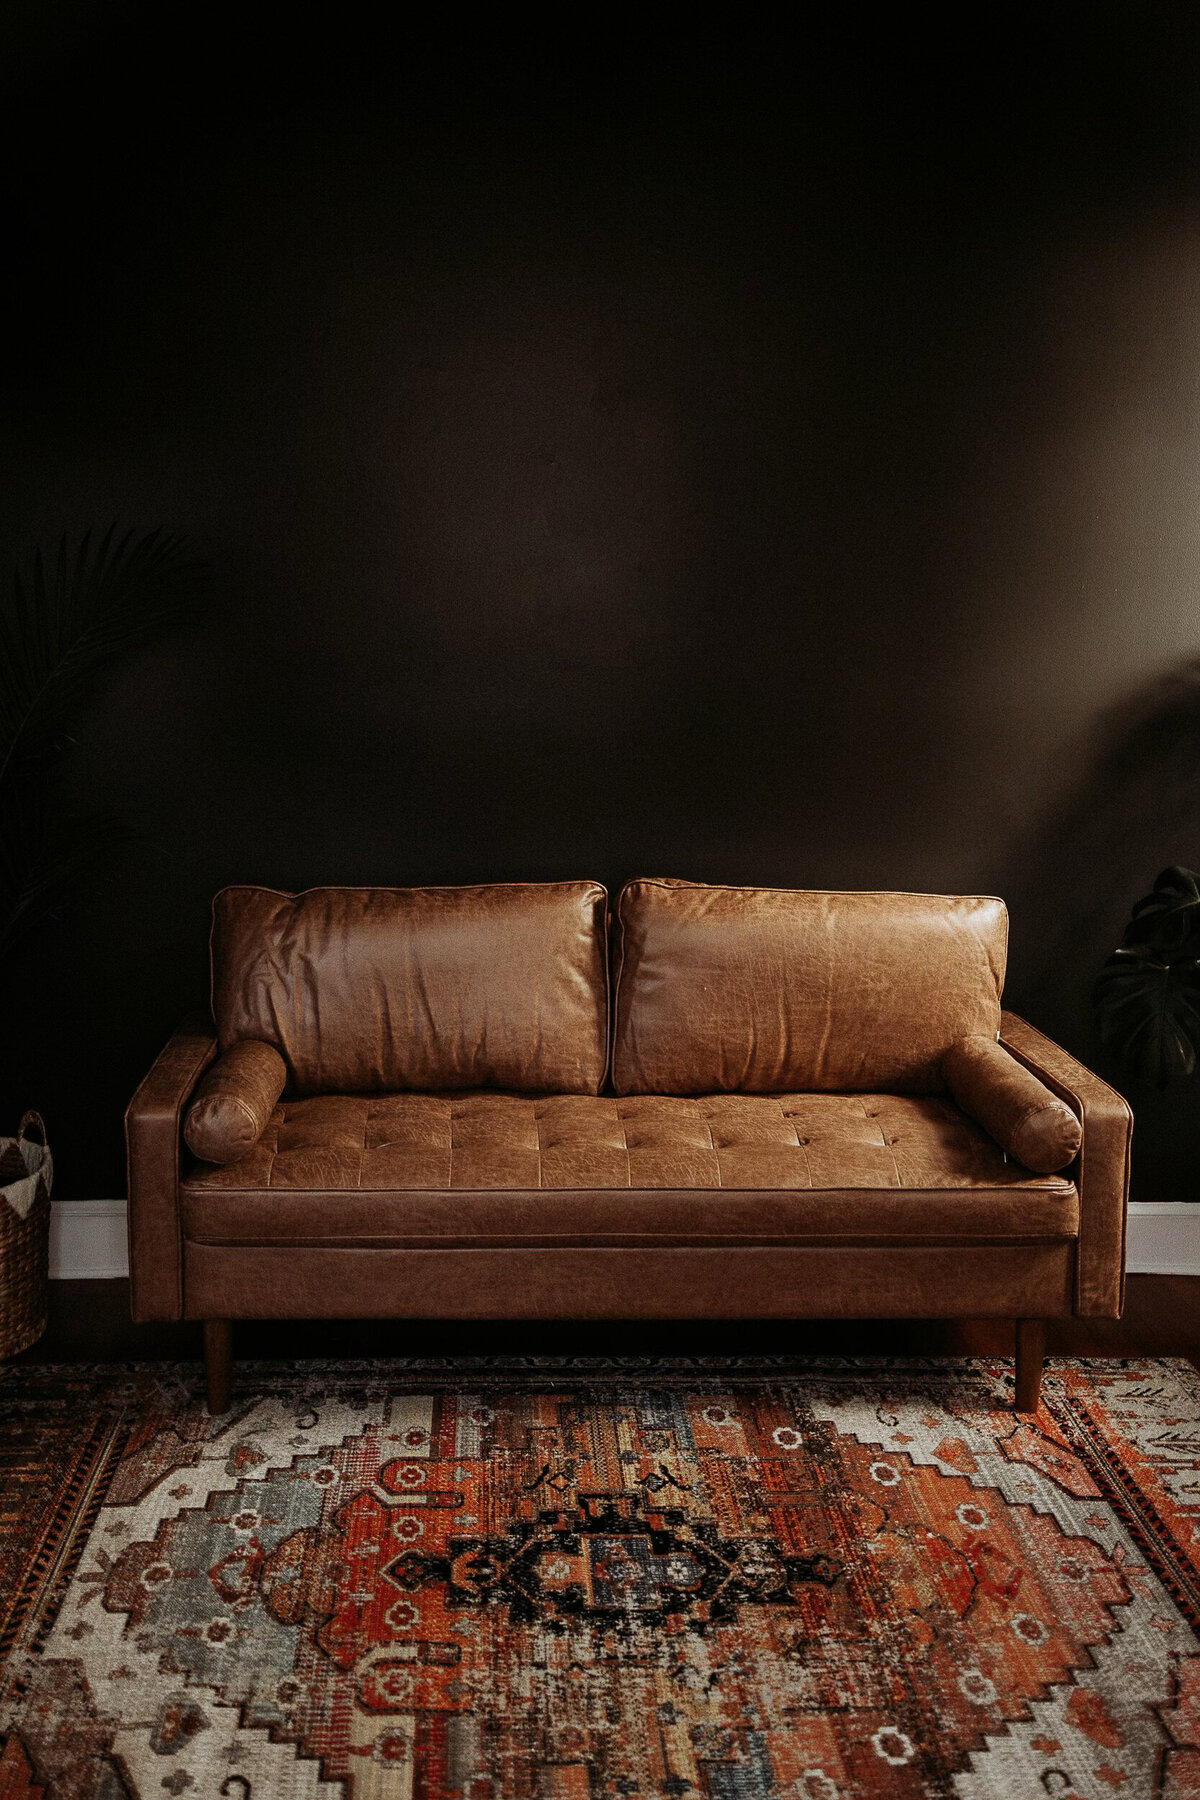 Dark wall with leather sofa